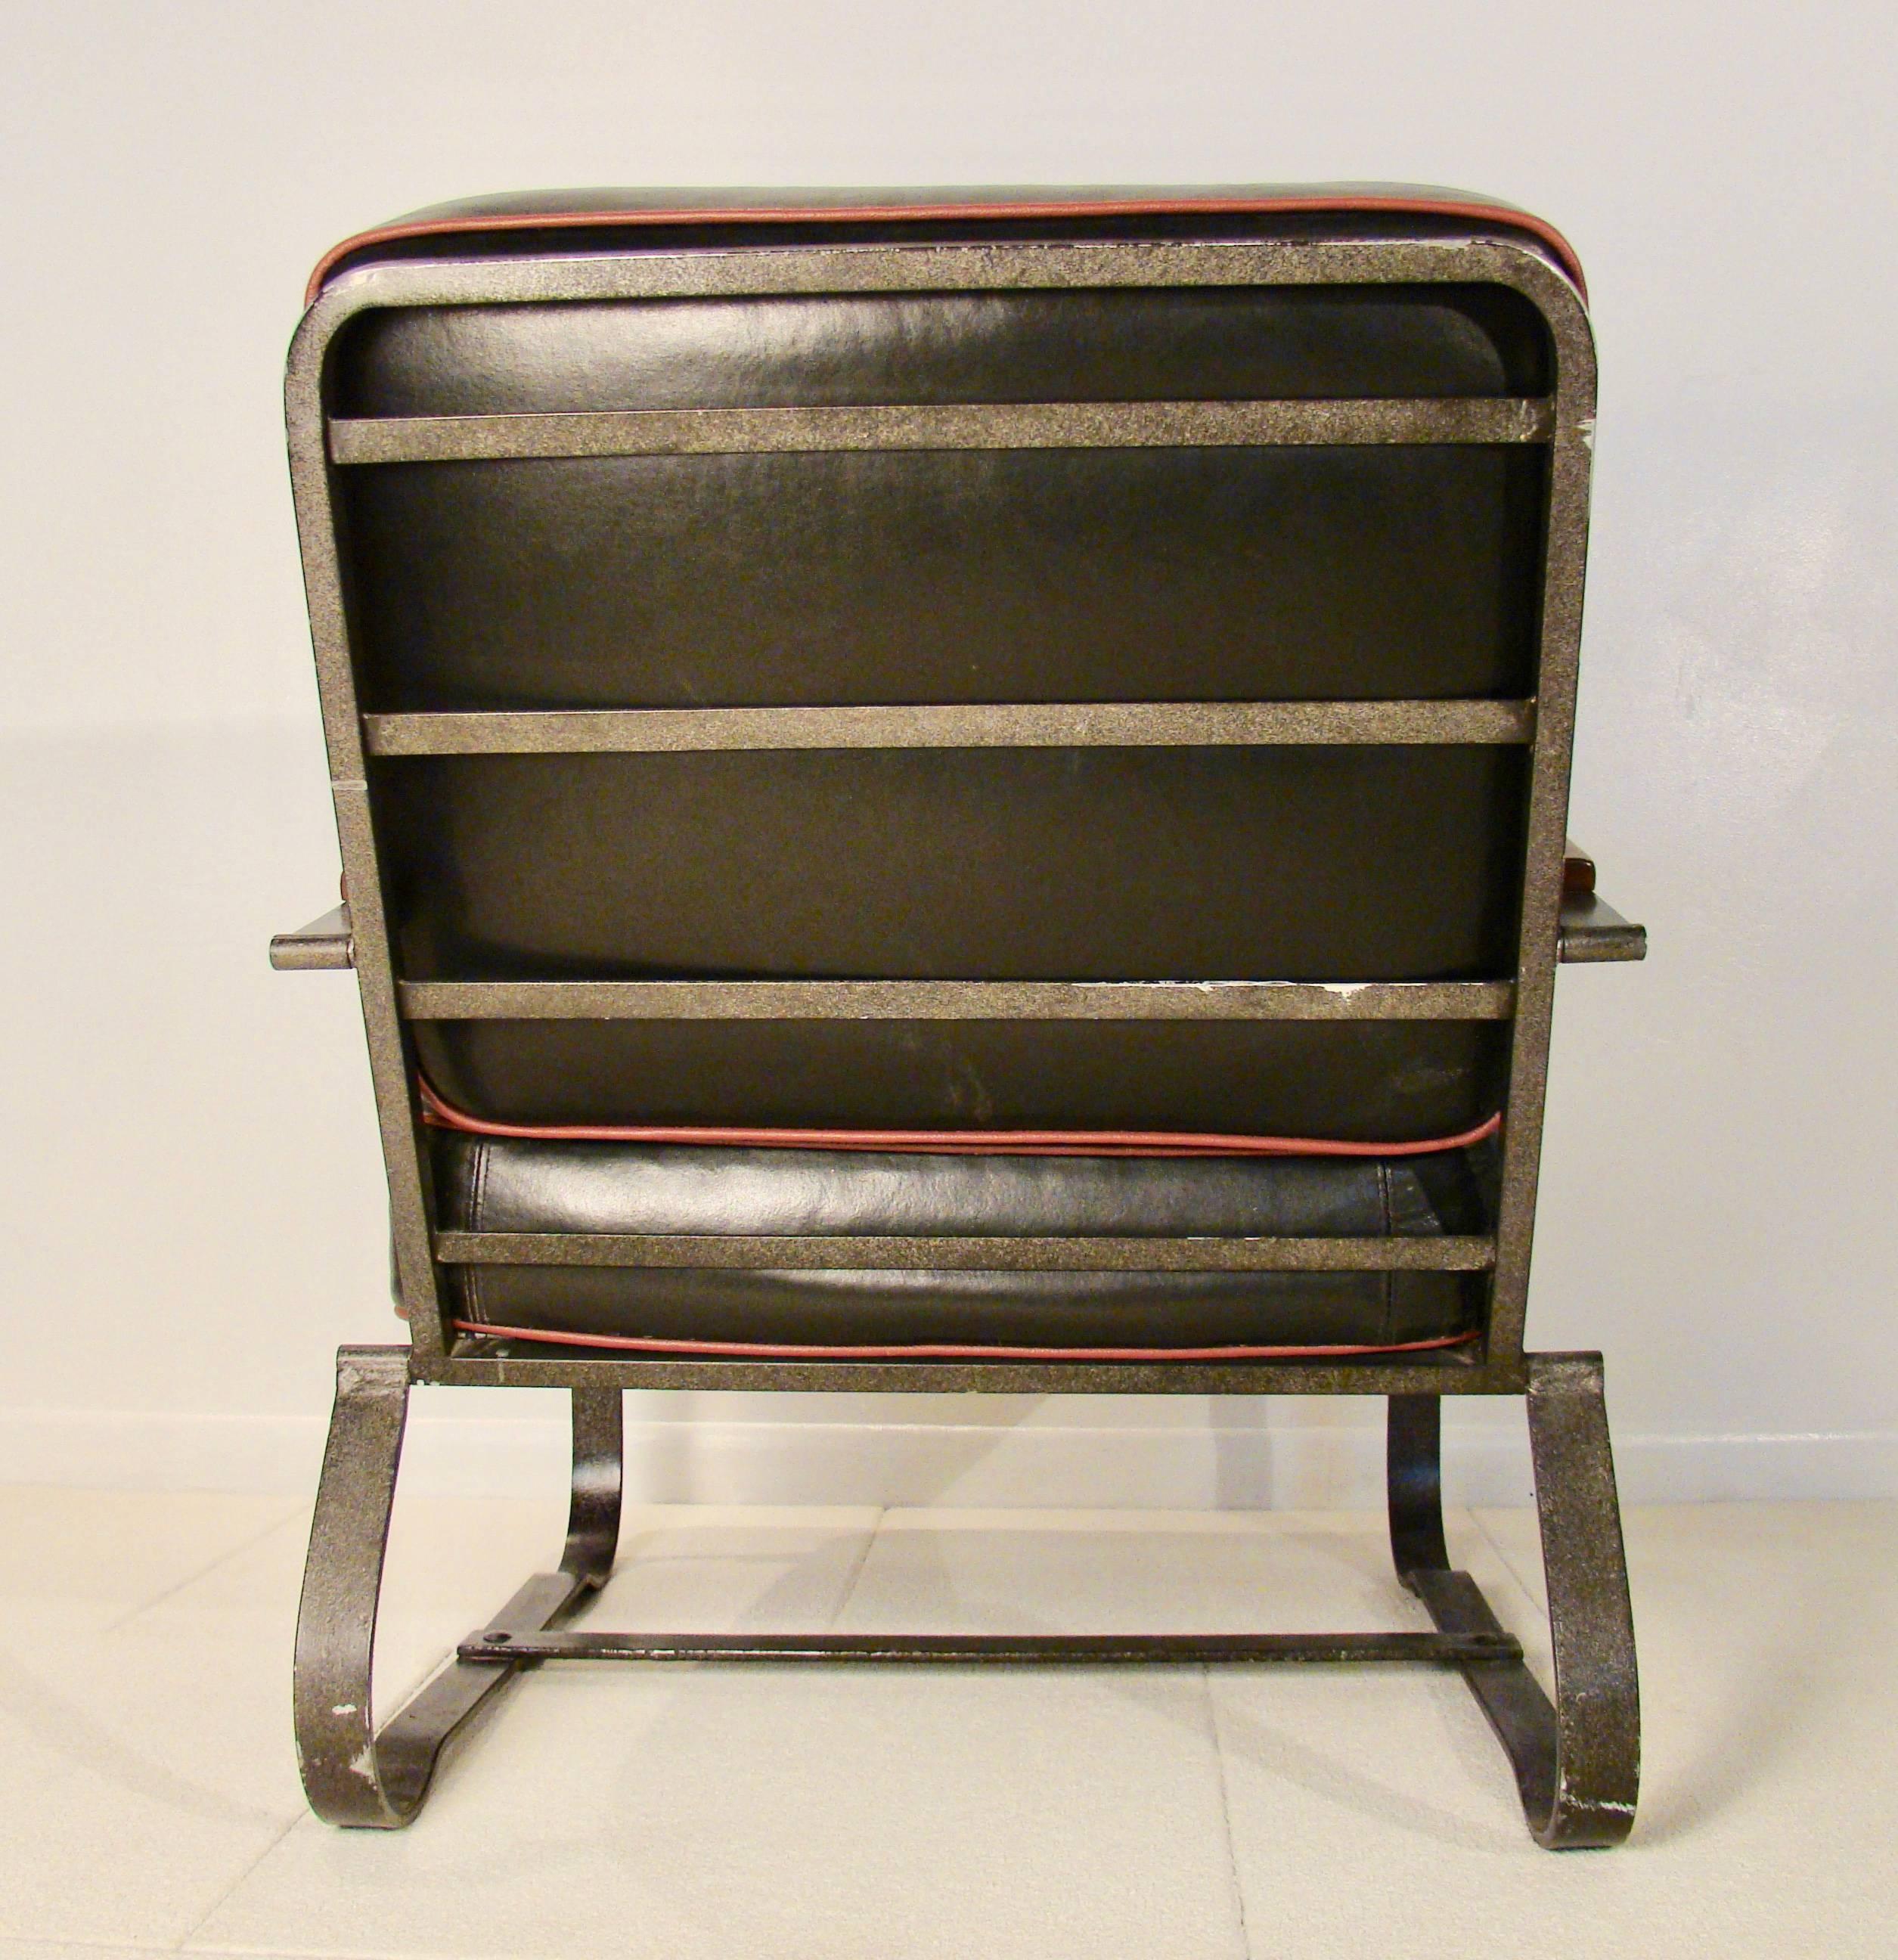 Painted Elusive Art Deco Machine Age Steel Lounge Chair and Ottoman by McKay